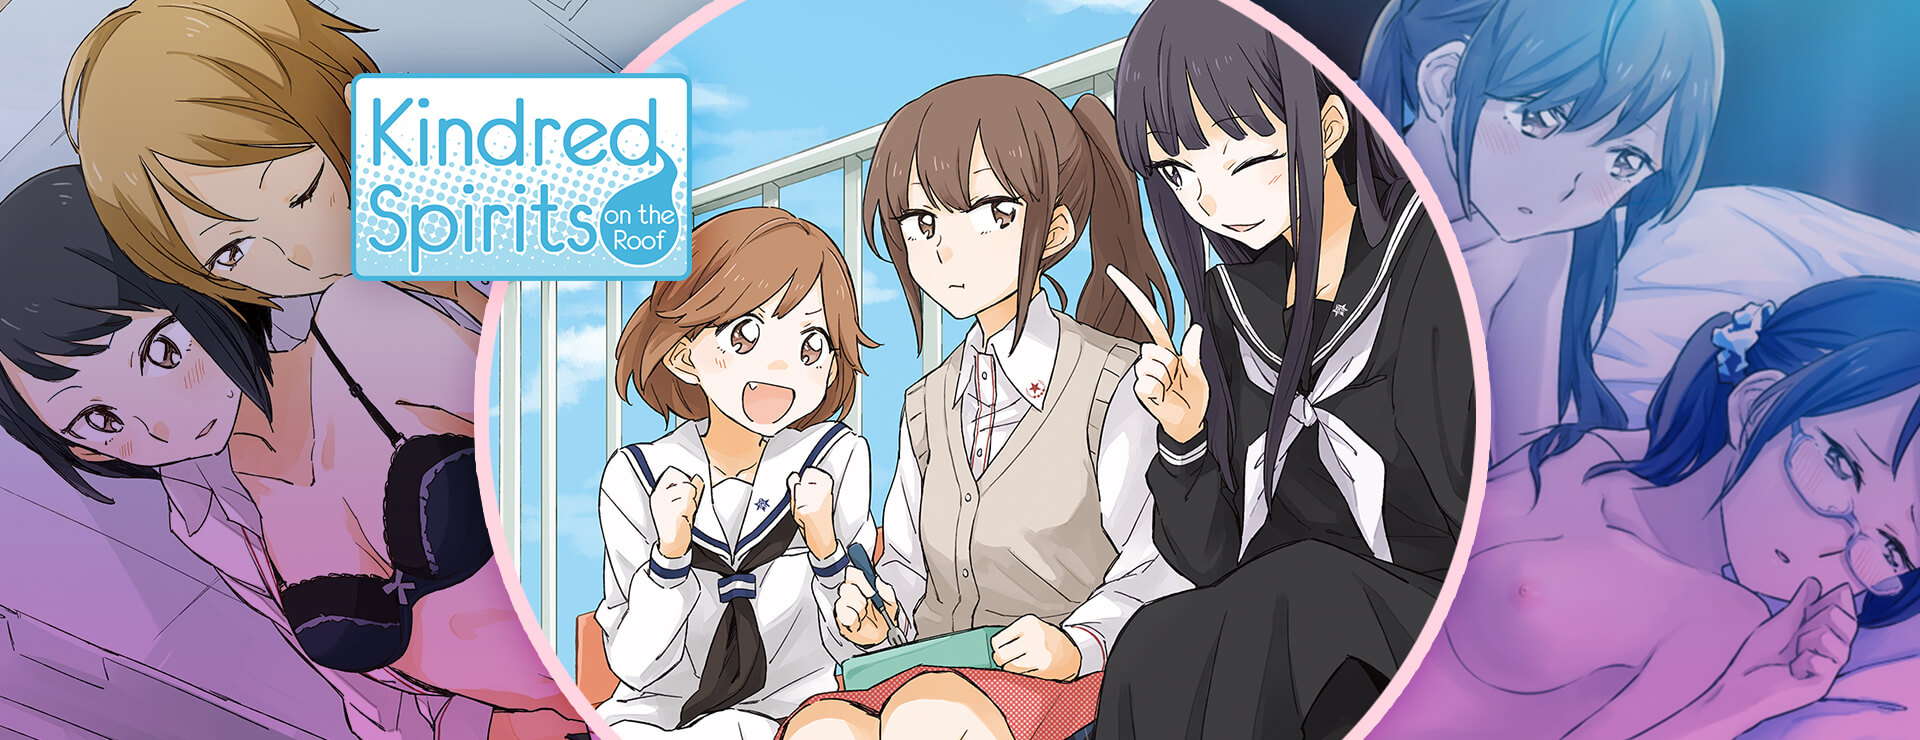 Kindred Spirits on the Roof - Visual Novel Game